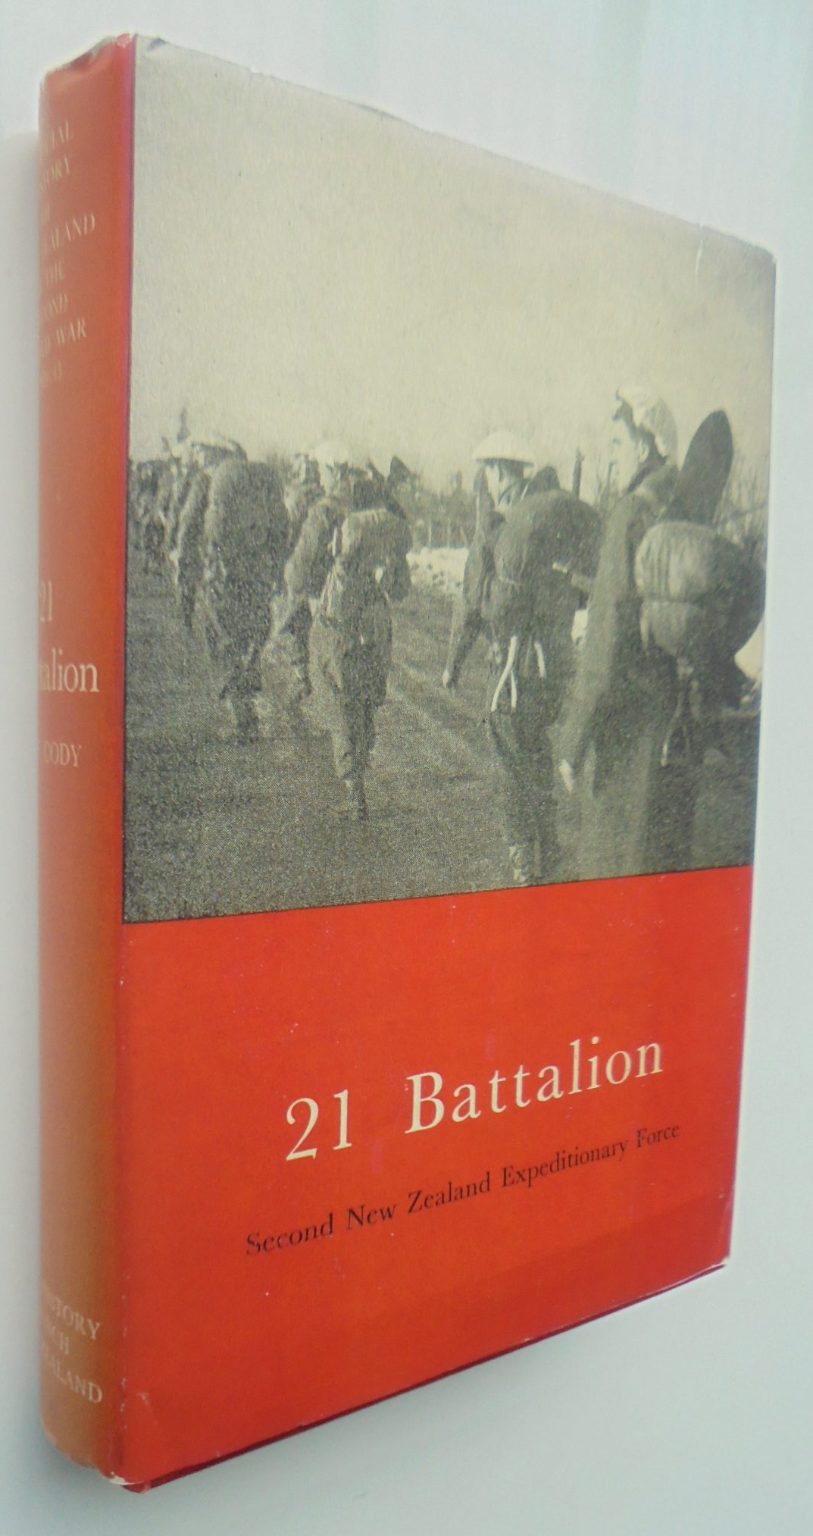 21 Battalion. Official History of New Zealand in the Second World War 1939-45 by J F Cody.